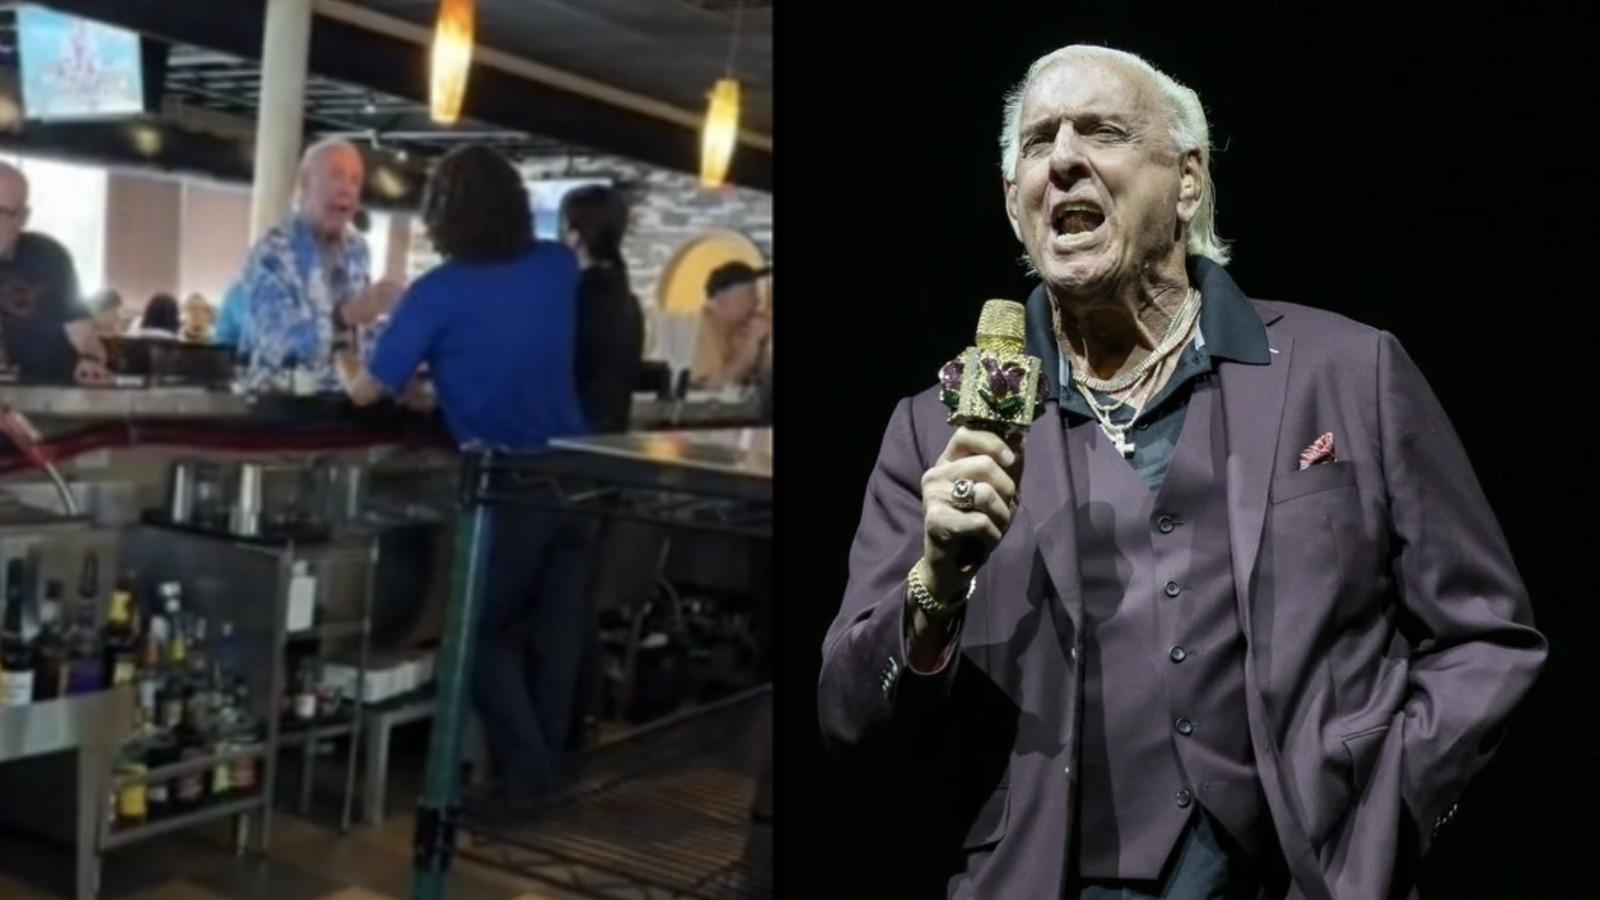 WWE legend Ric Flair gets thrown out of restaurant after strange altercation with the kitchen manager